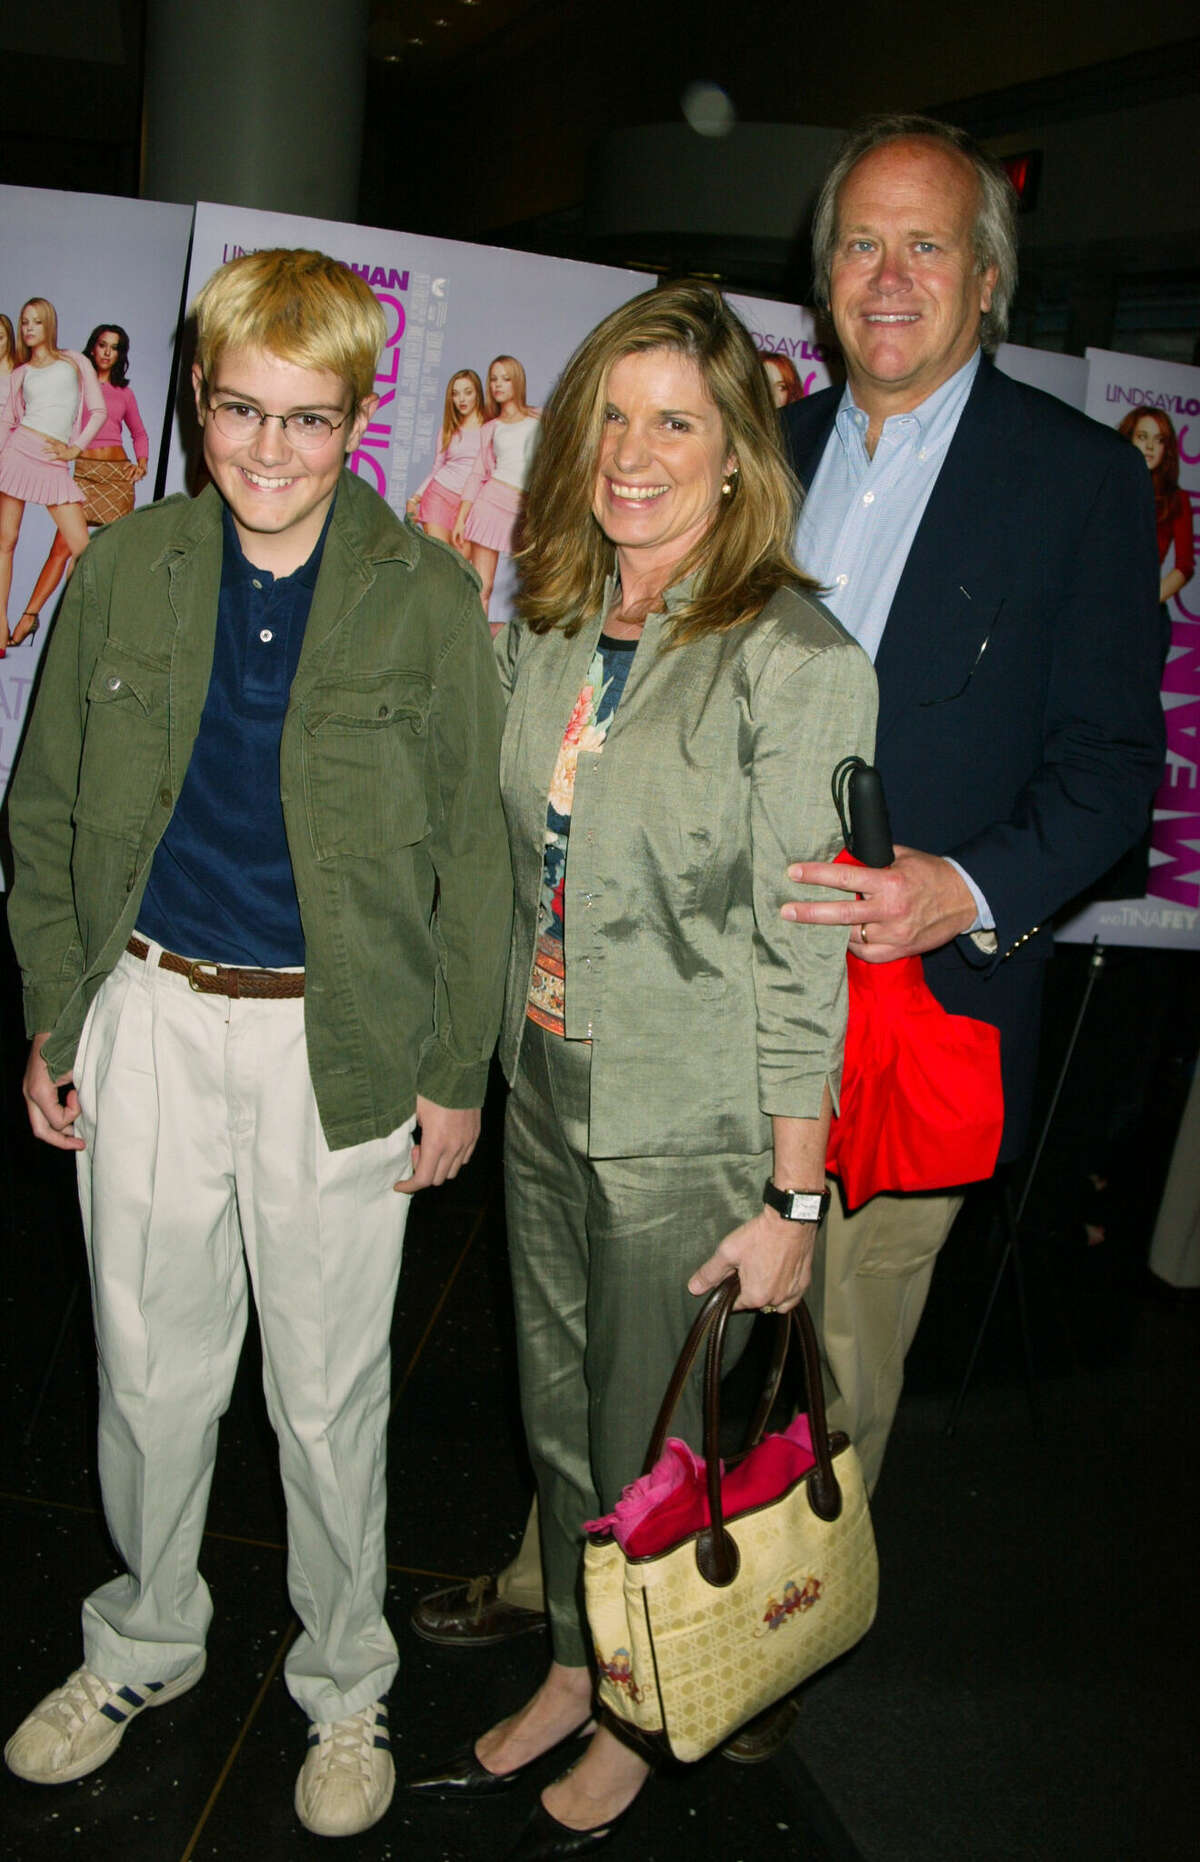 Susan Saint James (center), husband Dick Ebersol (right), and son Teddy.